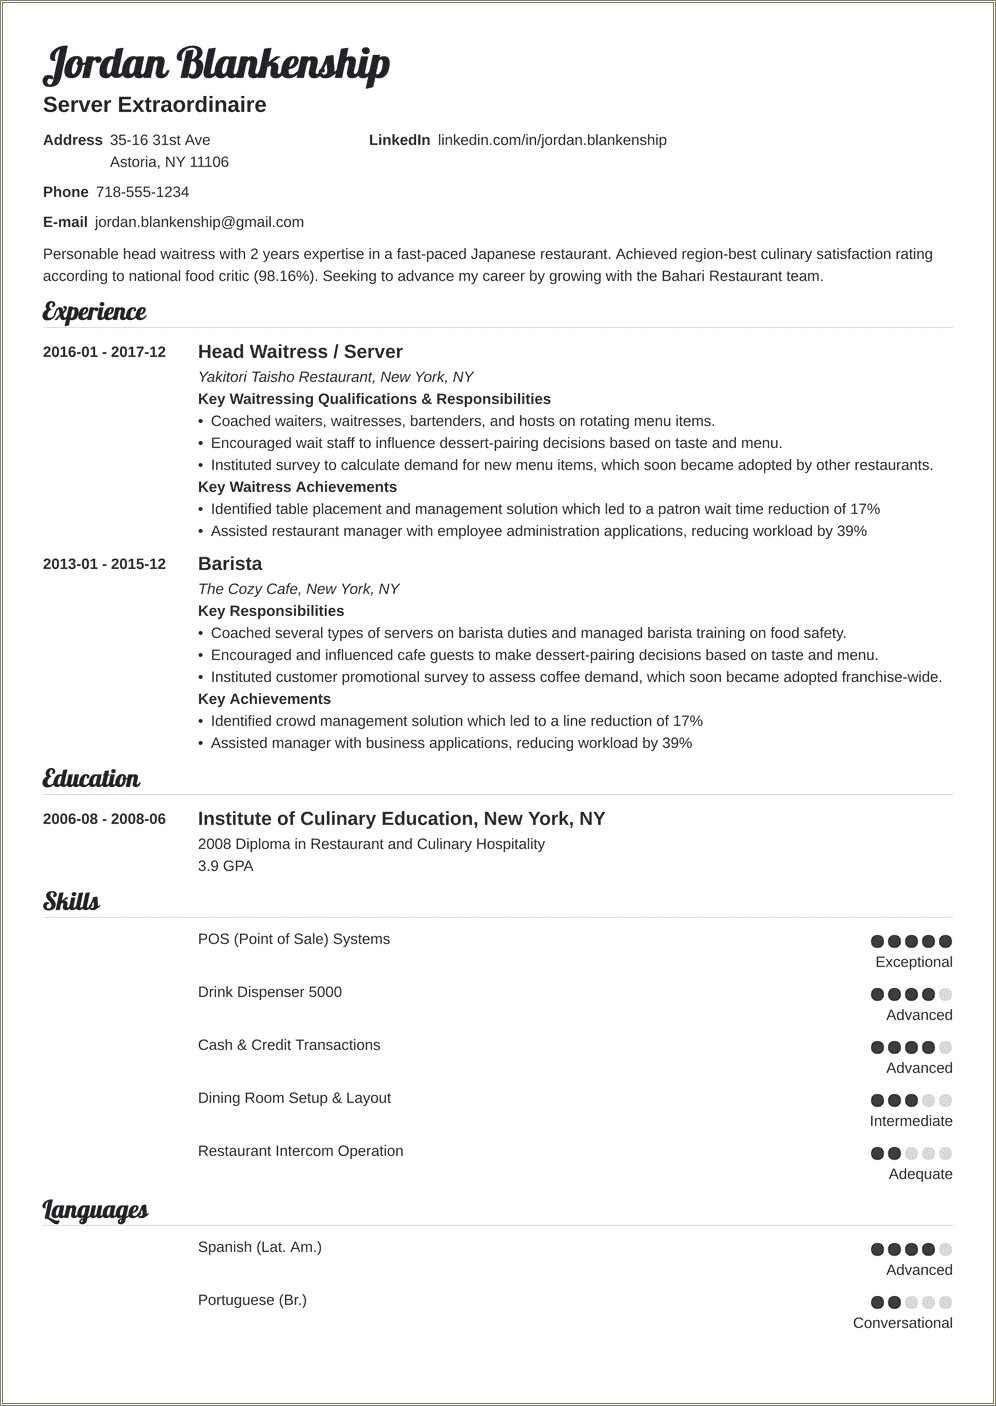 Sample Simple Resume For Catering Services